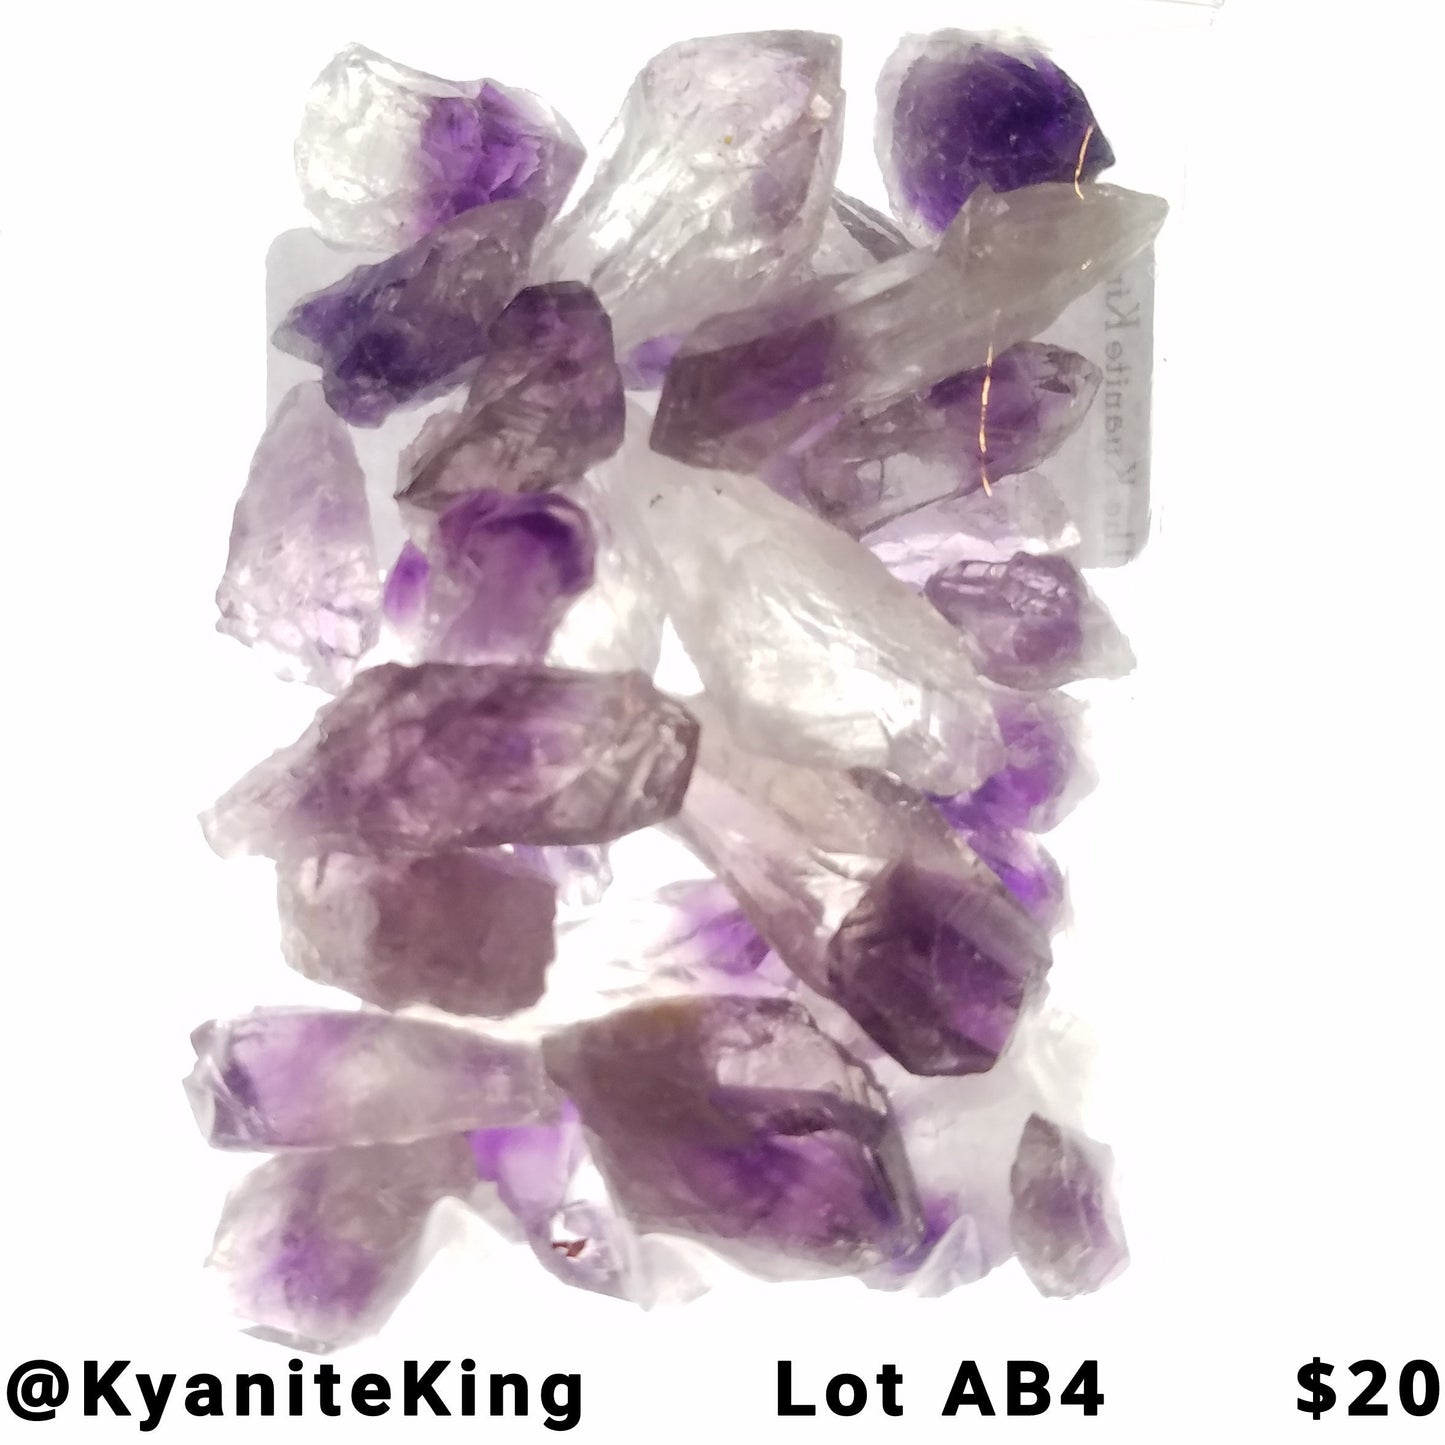 Amethyst Small Crystal Points 5 Lots Available!!